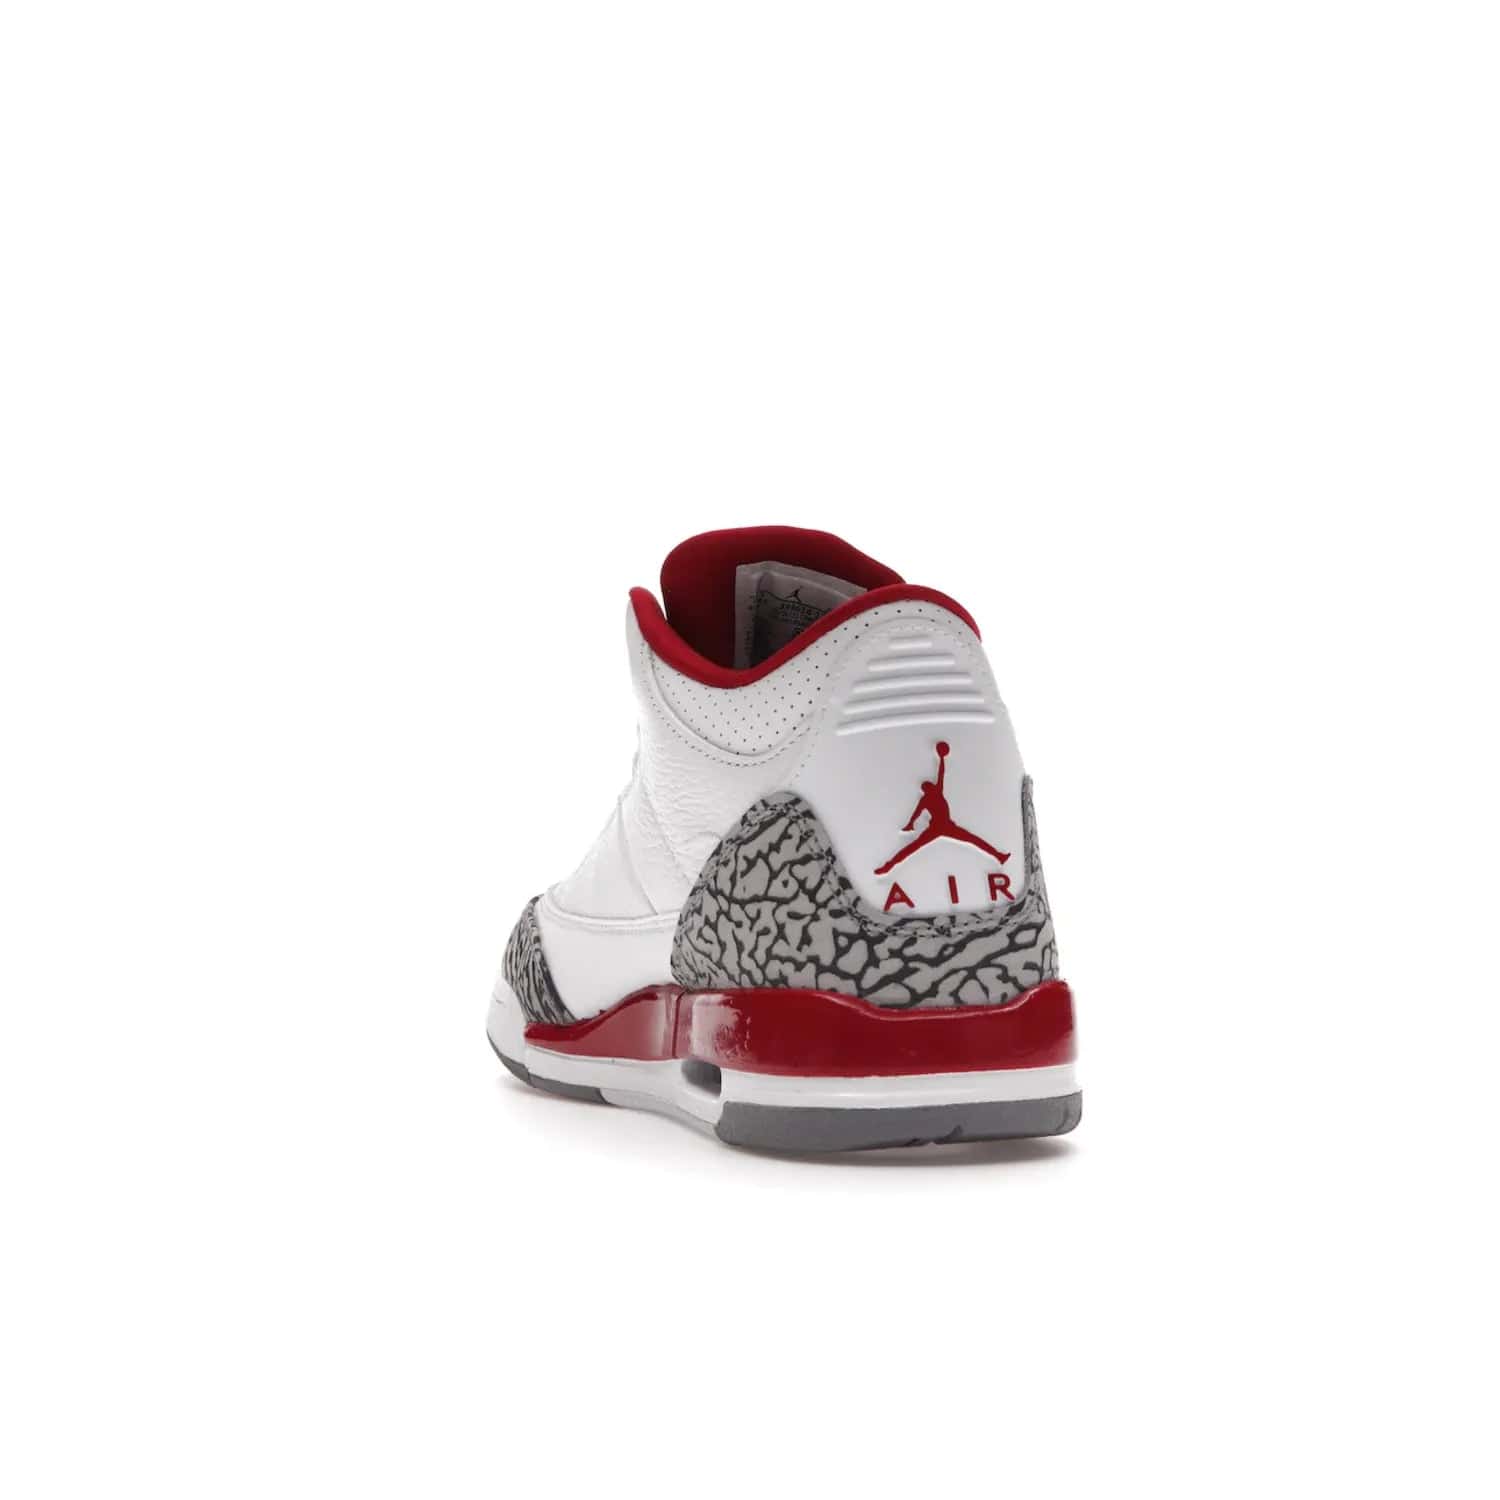 Jordan 3 Retro Cardinal (GS) - Image 26 - Only at www.BallersClubKickz.com - Shop the kid-sized Air Jordan 3 Retro Cardinal GS, released Feb 2022. White tumbled leather upper, light curry accenting, cement grey and classic red details throughout. Visible Air cushioning, midsole, and an eye-catching outsole. Show off your style with this fashionable streetwear silhouette.